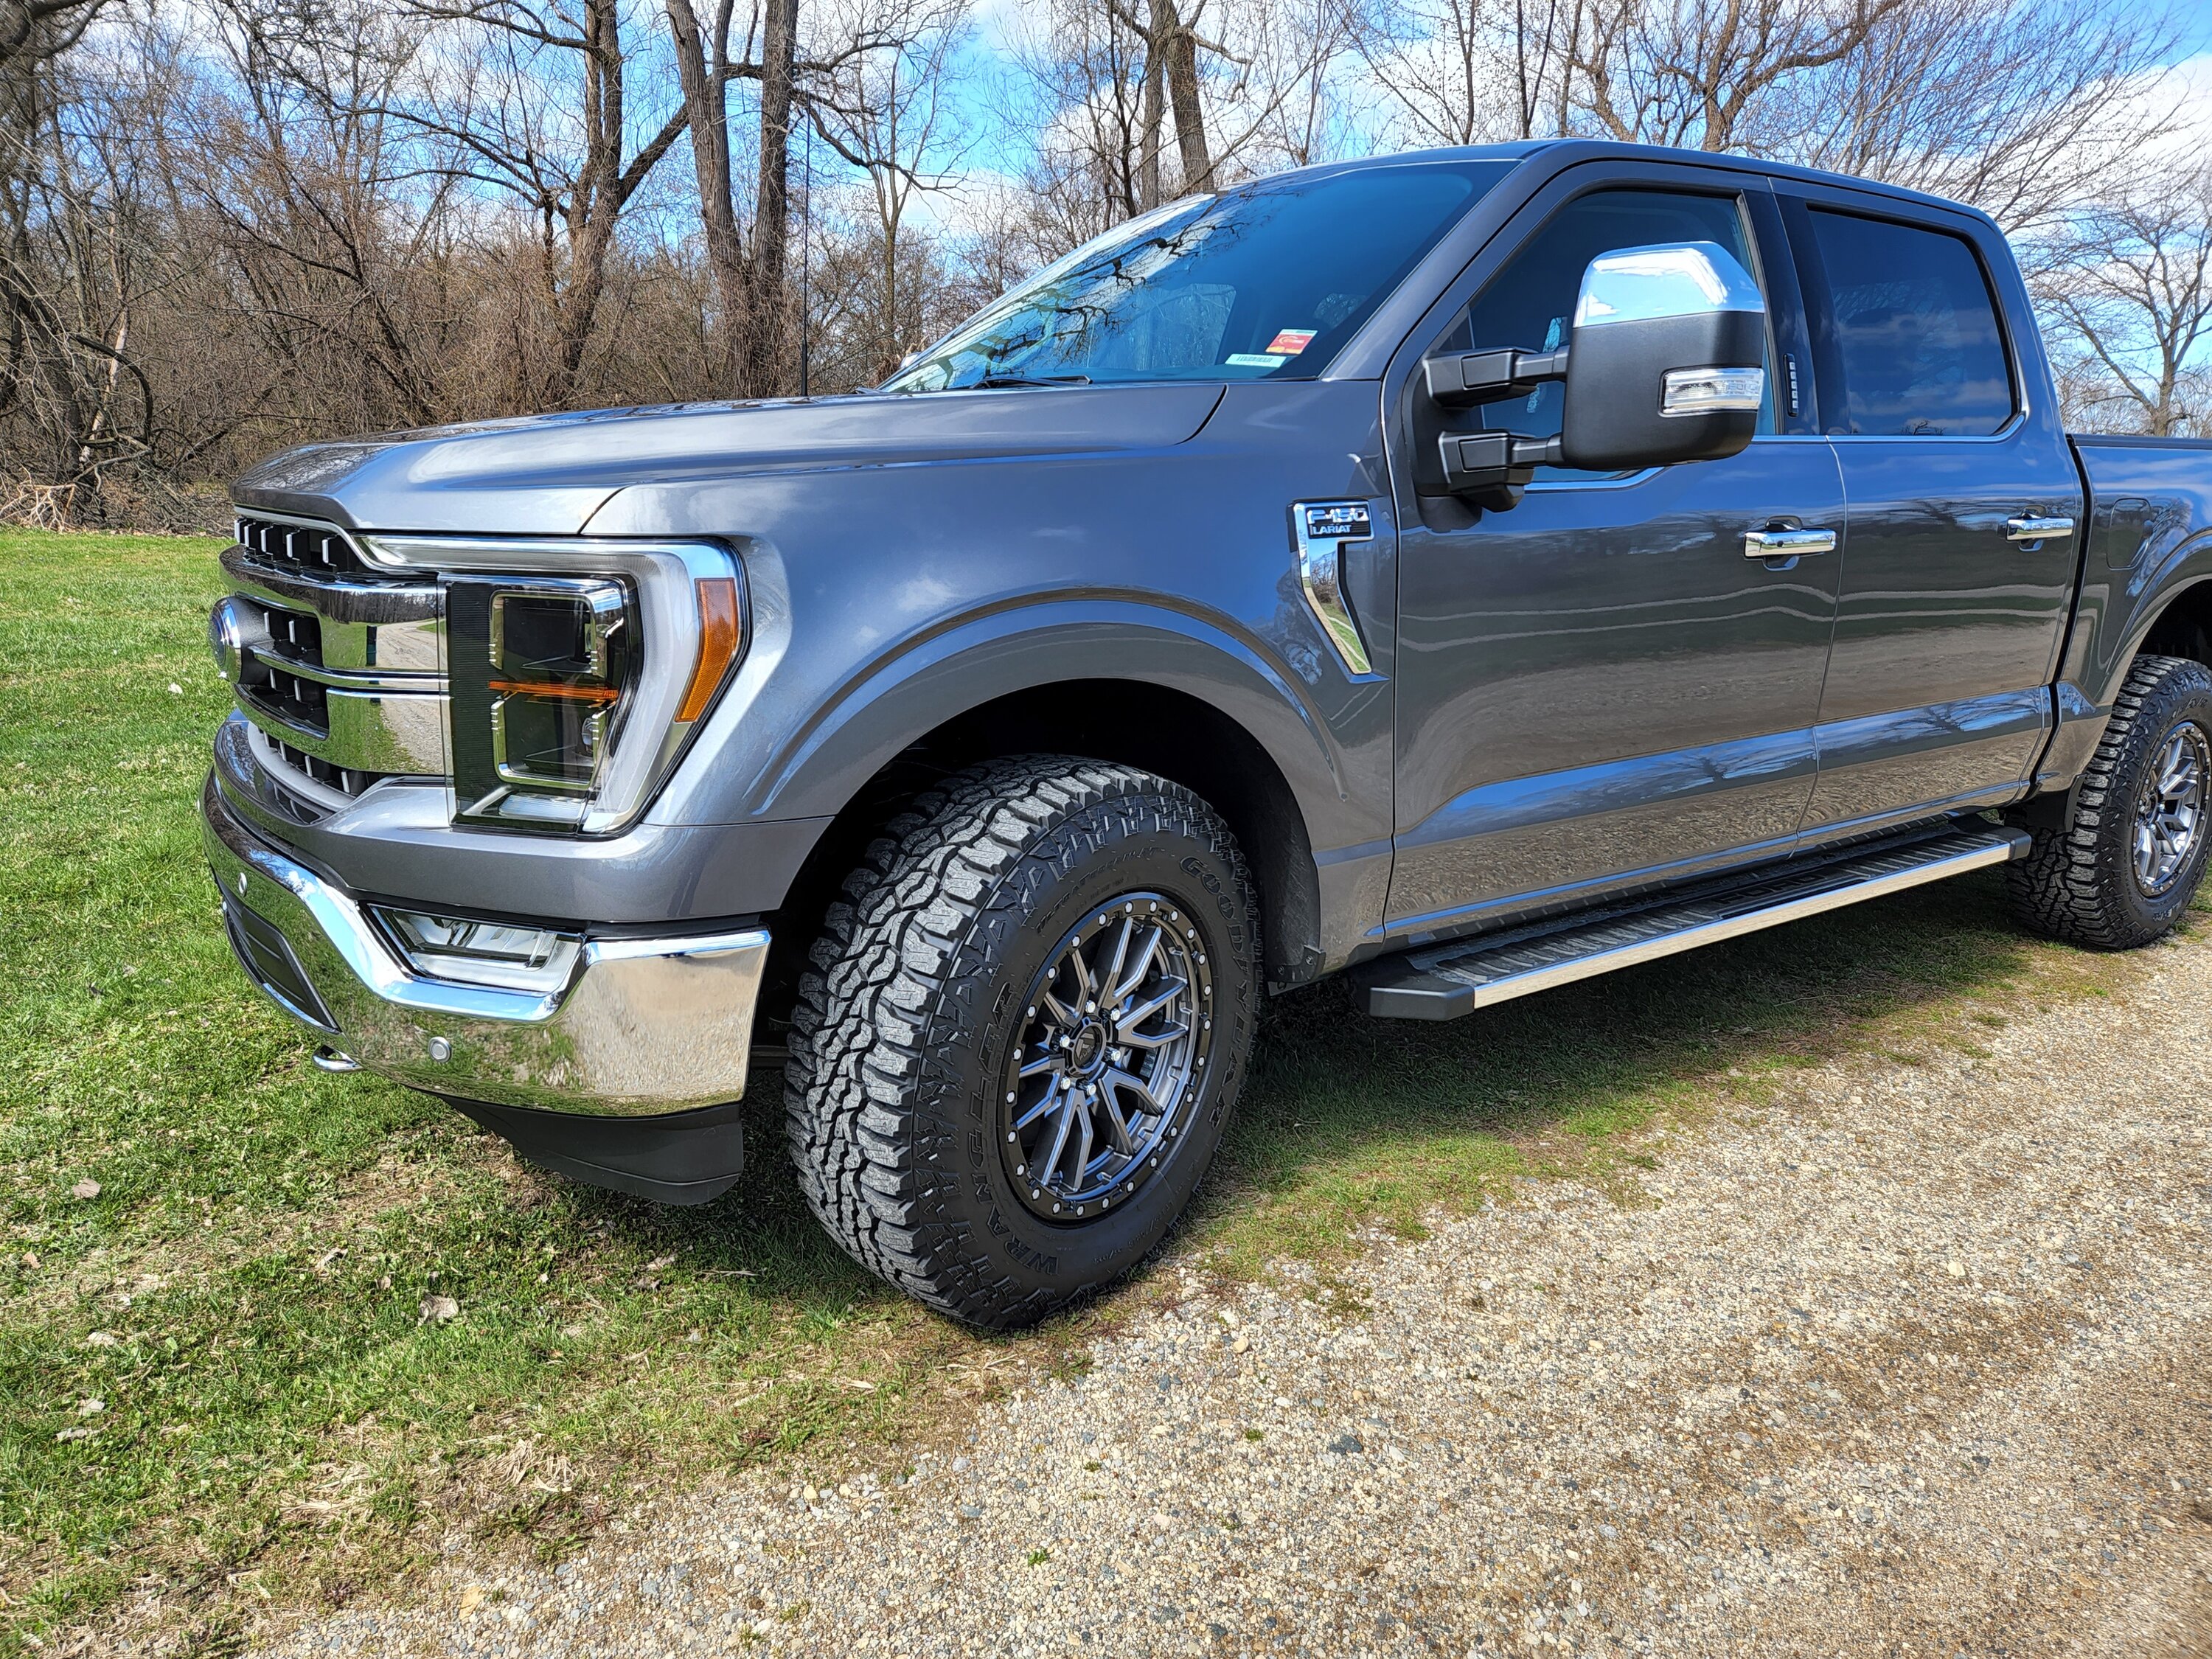 Ford F-150 Post a Pic of Your F150 and We’ll Rate It 20220417_111938